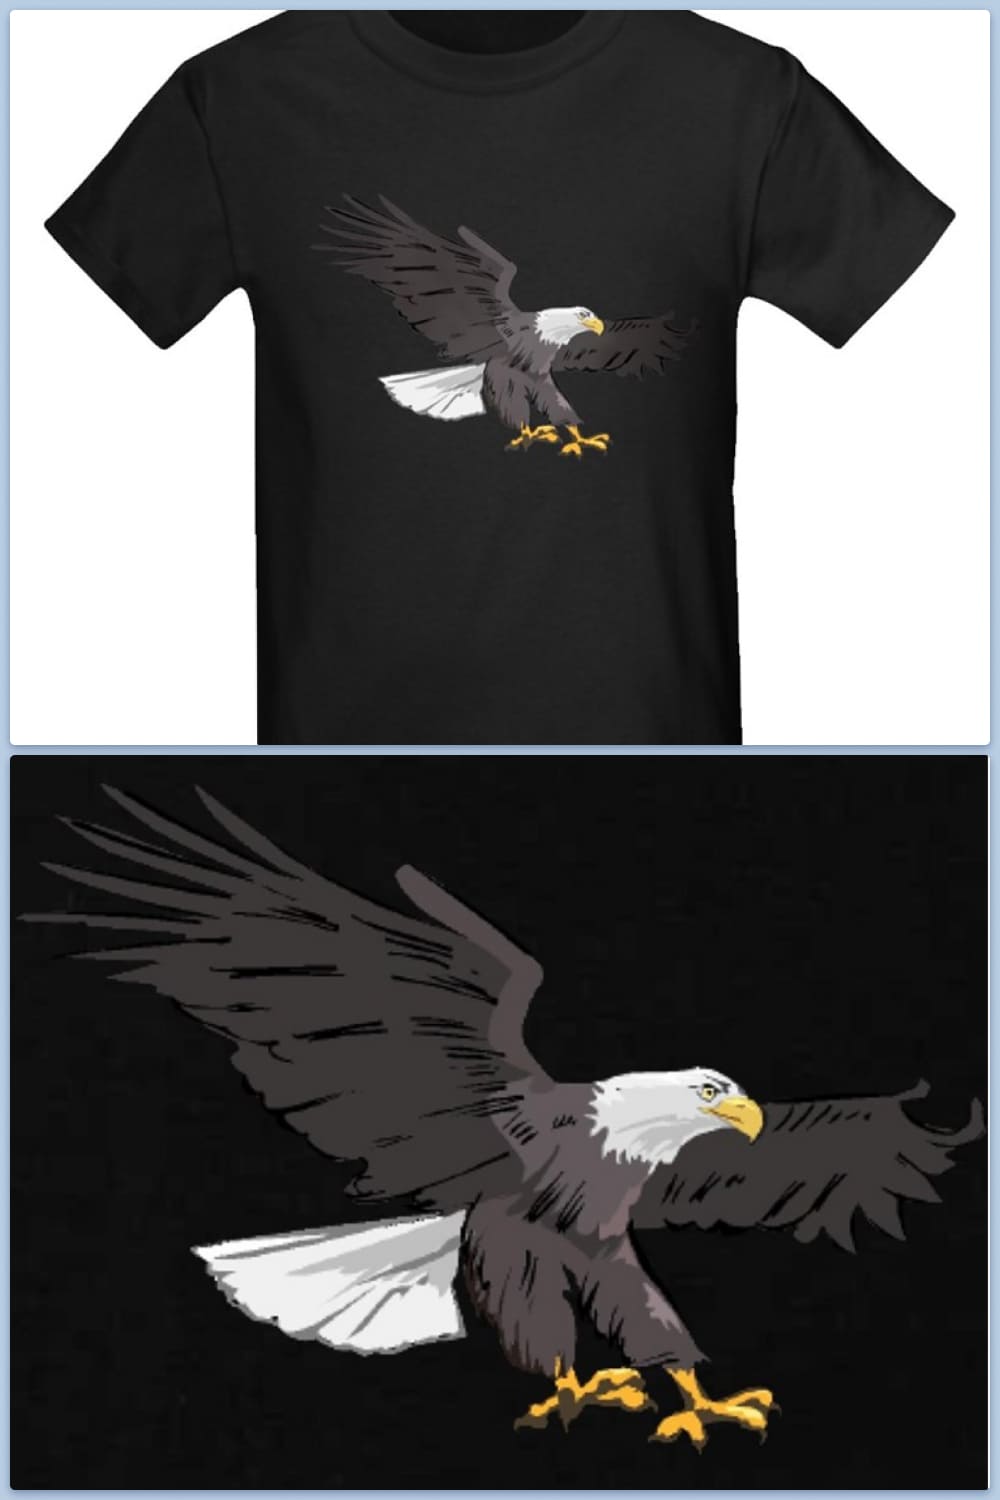 Black T-shirt with a soaring eagle.